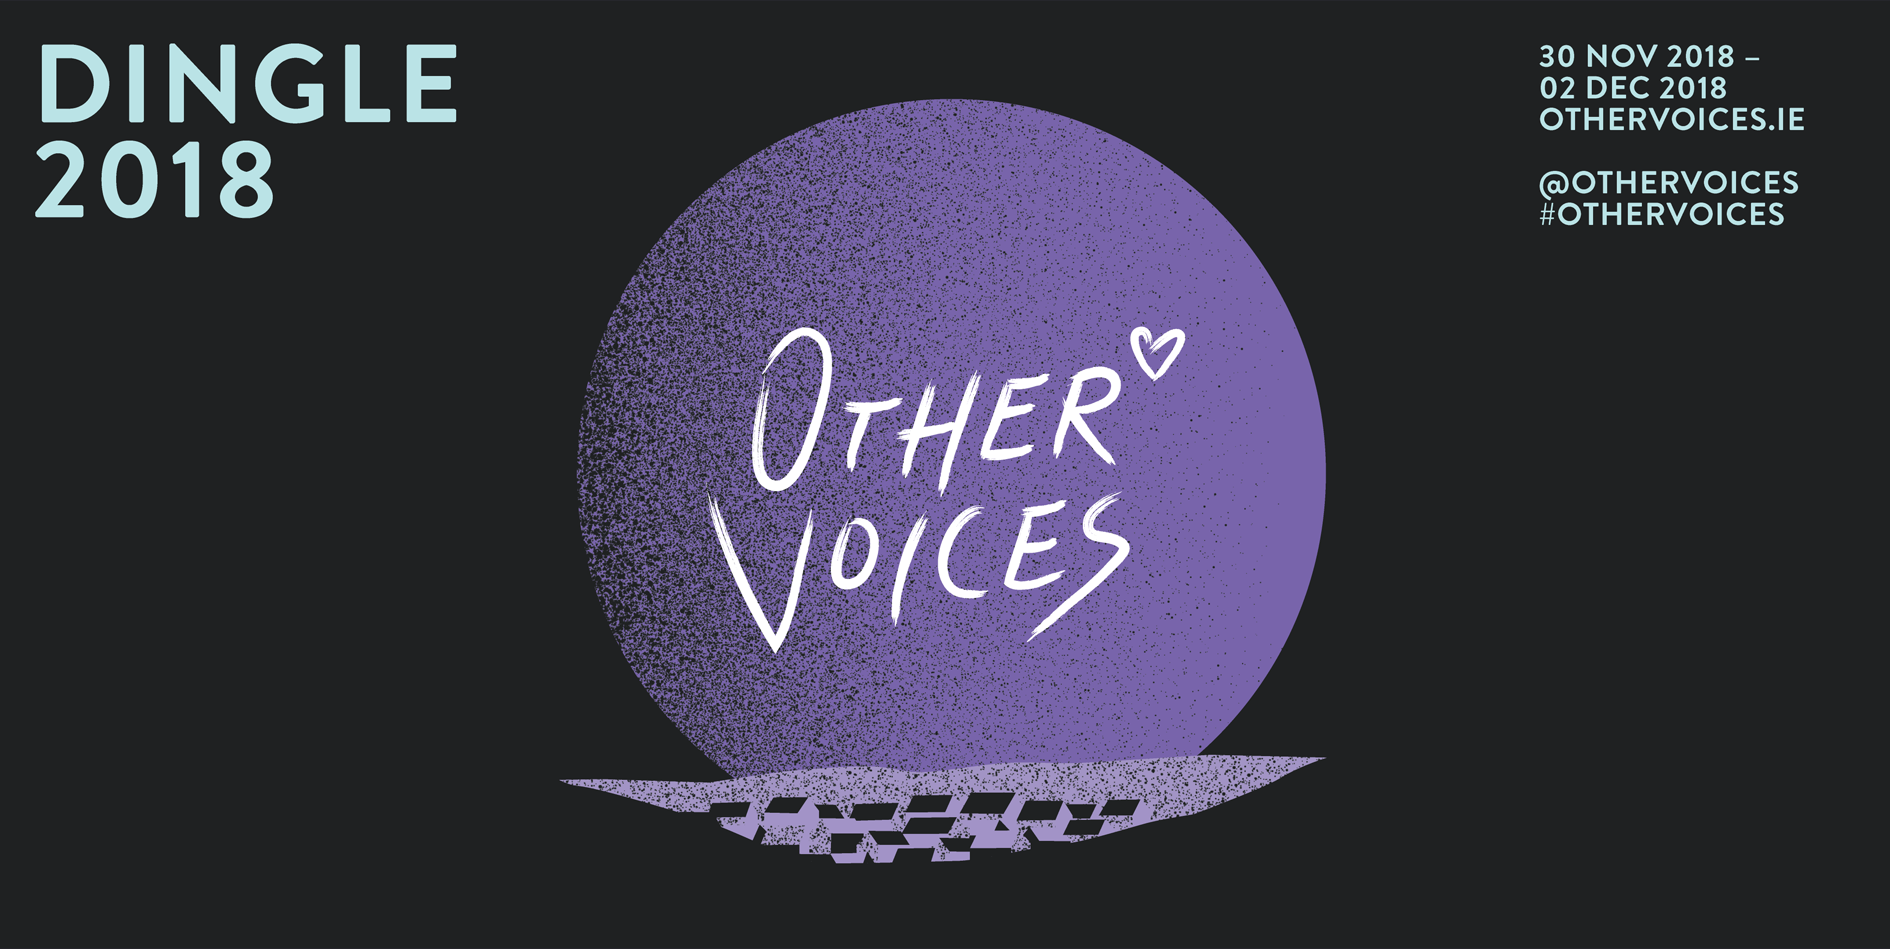 OTHER VOICES